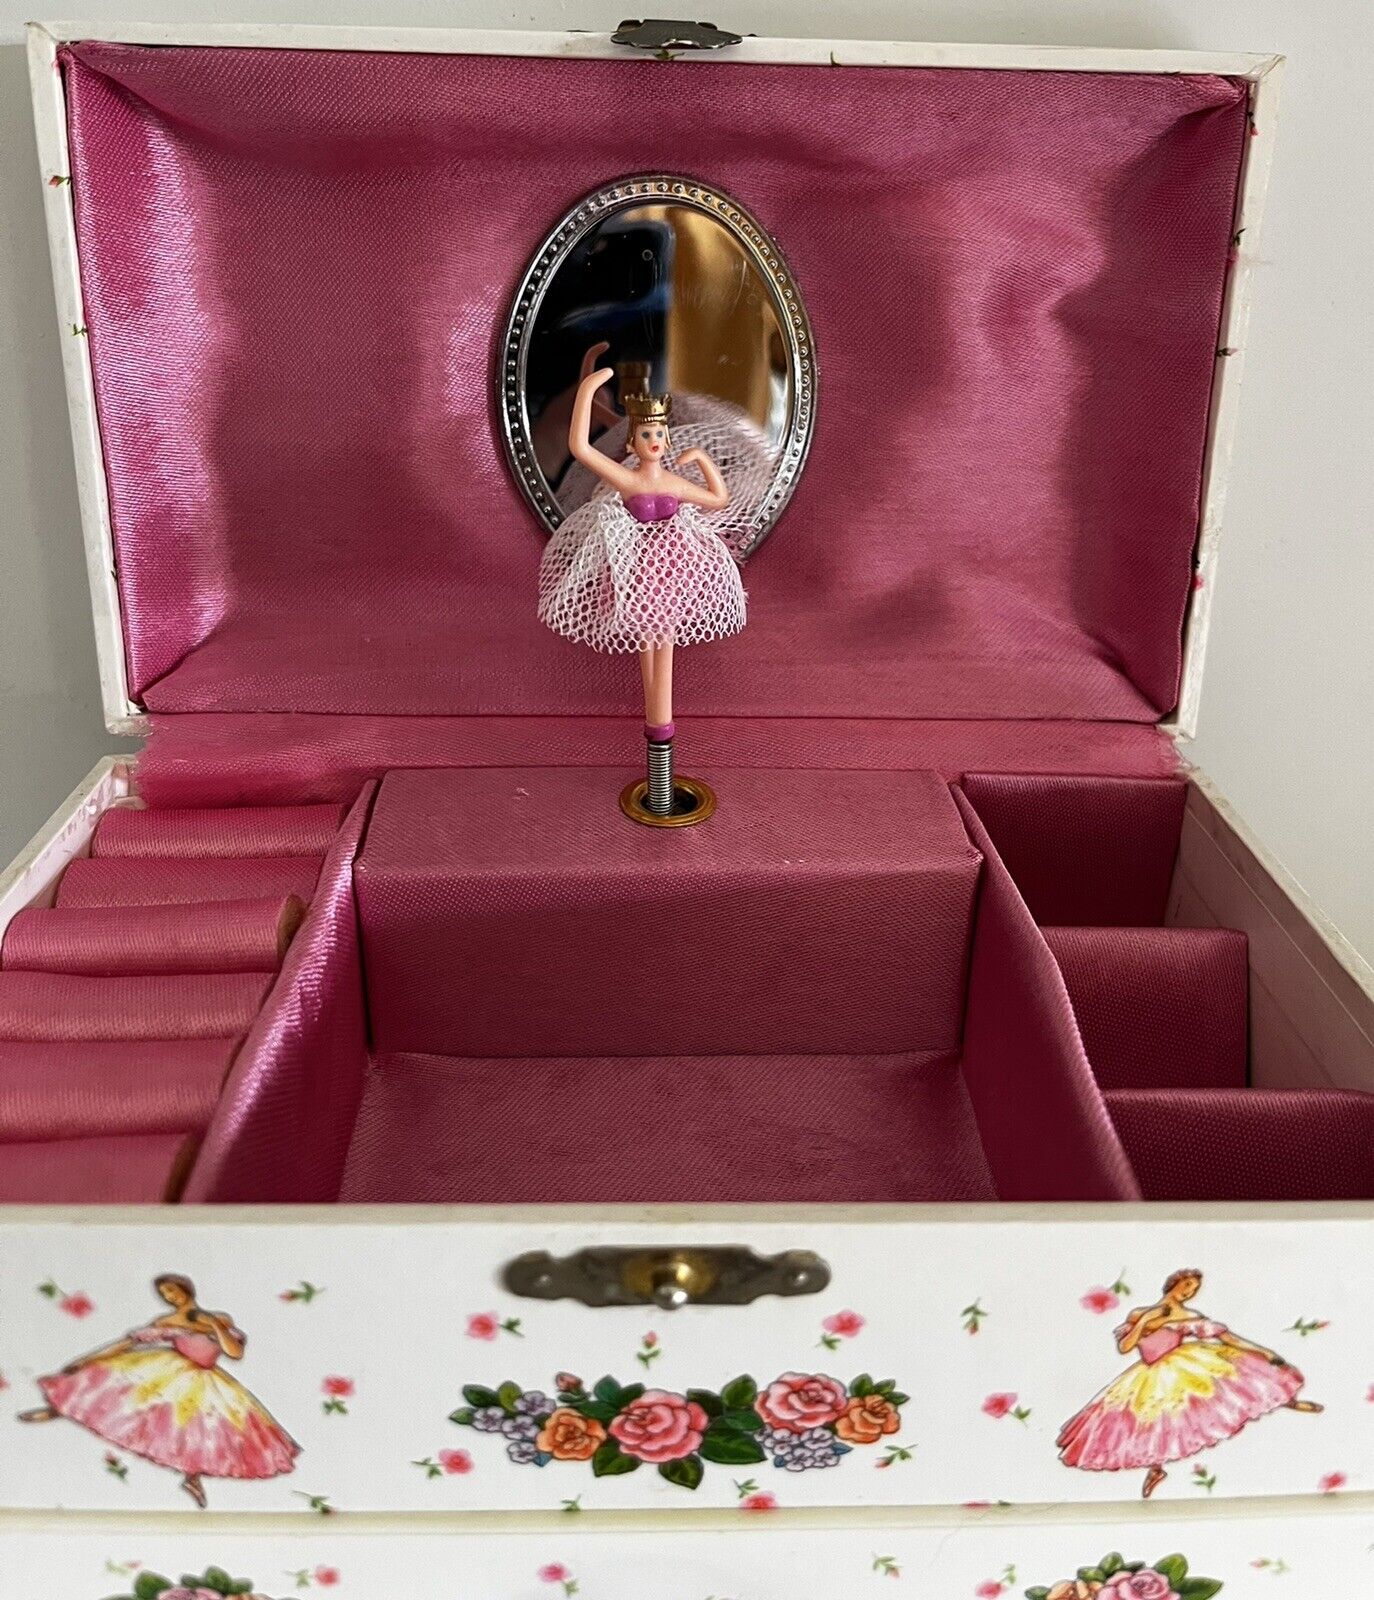 VTG Pretty Pink Flowered Dancing Ballerina Jewelry /Music Box Excellent Shape